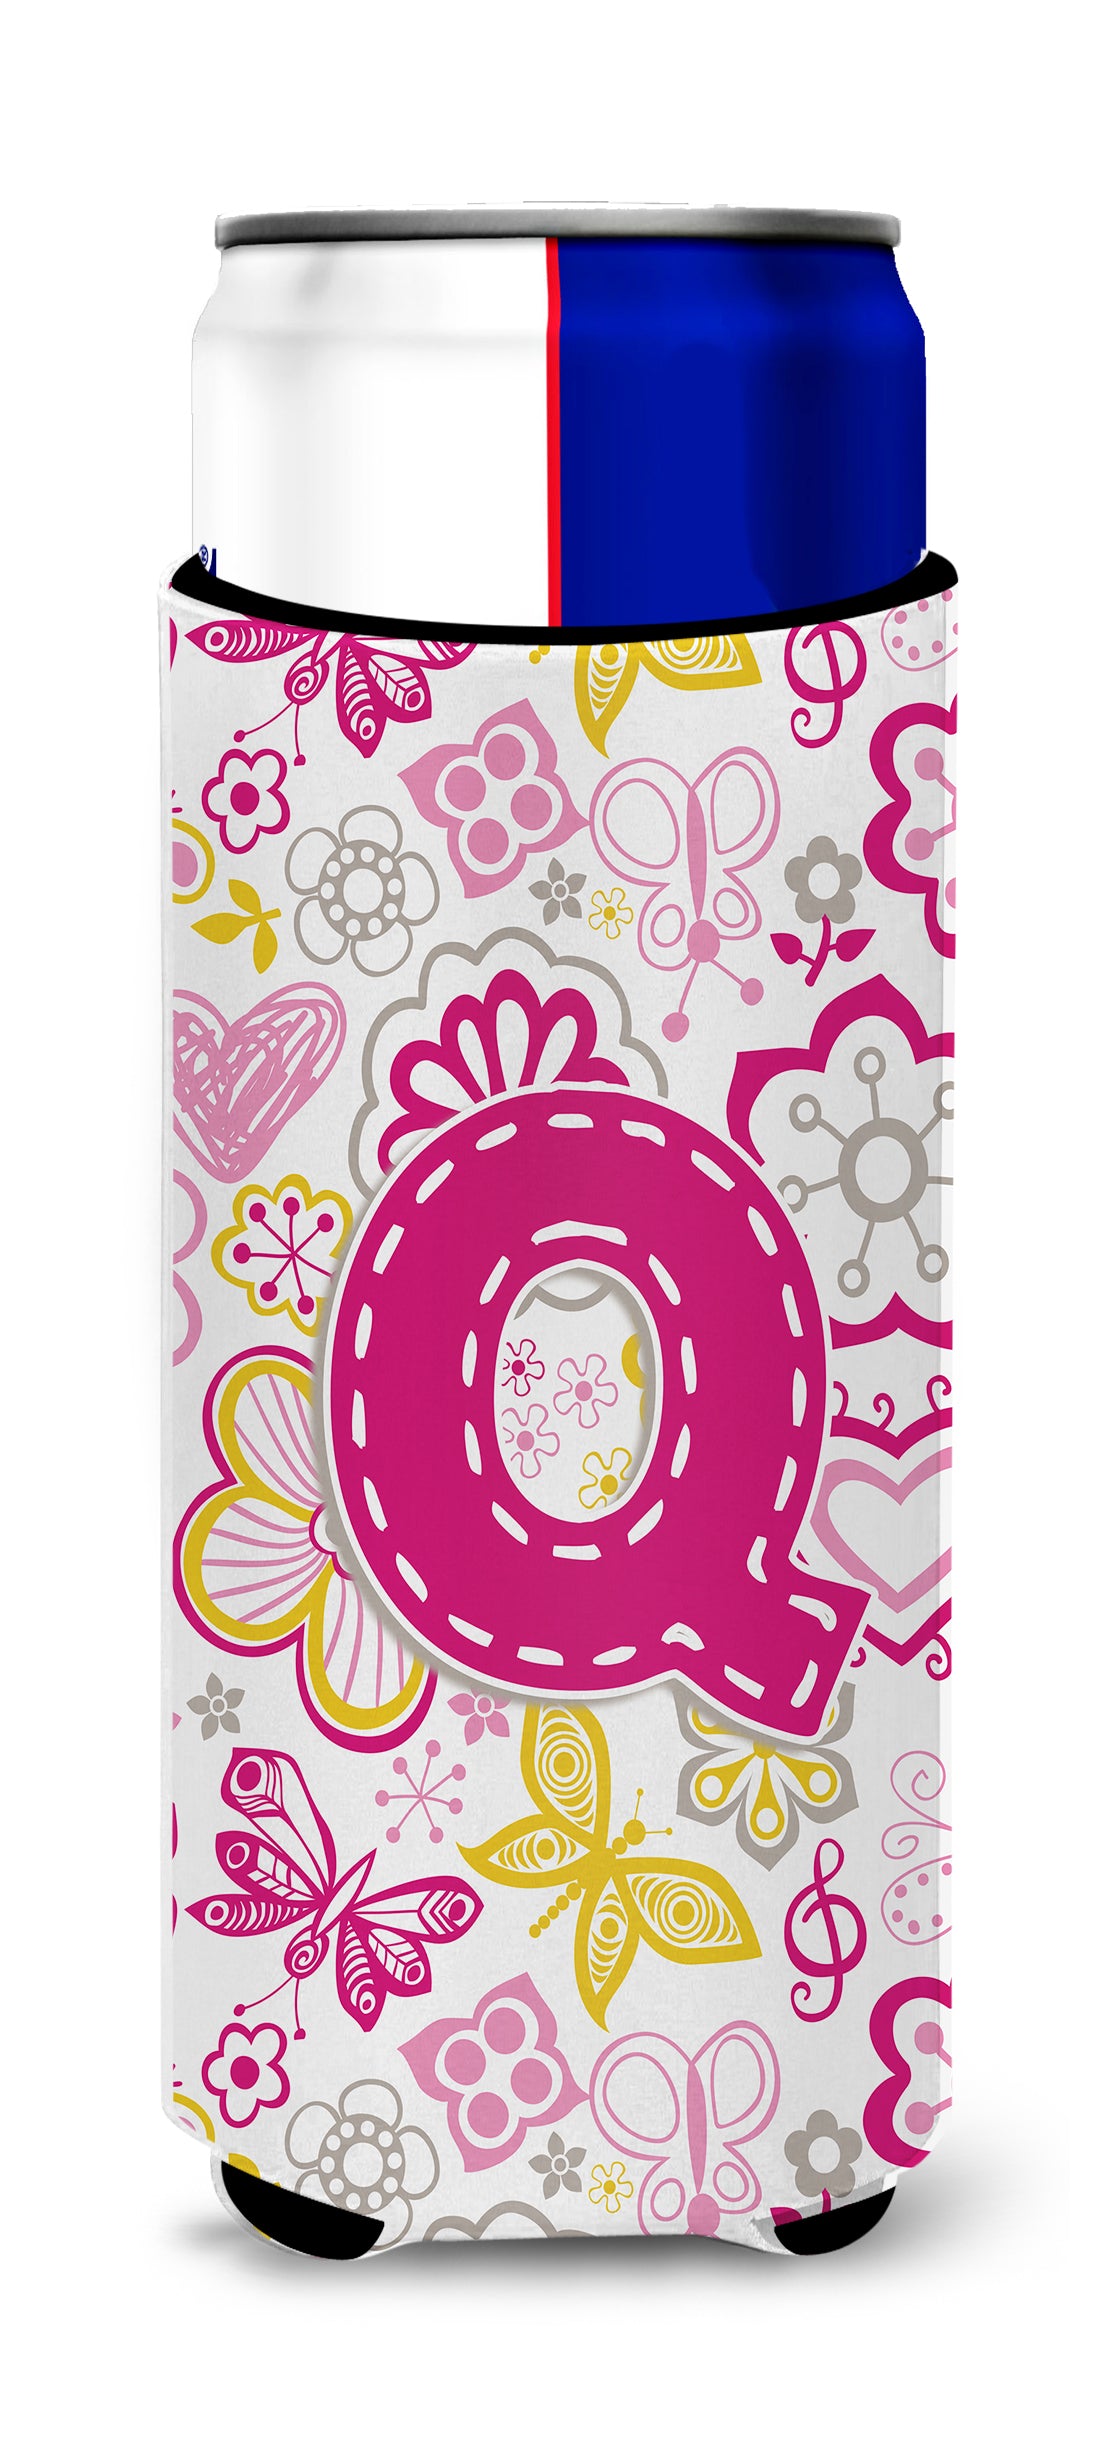 Letter Q Flowers and Butterflies Pink Ultra Beverage Insulators for slim cans CJ2005-QMUK.